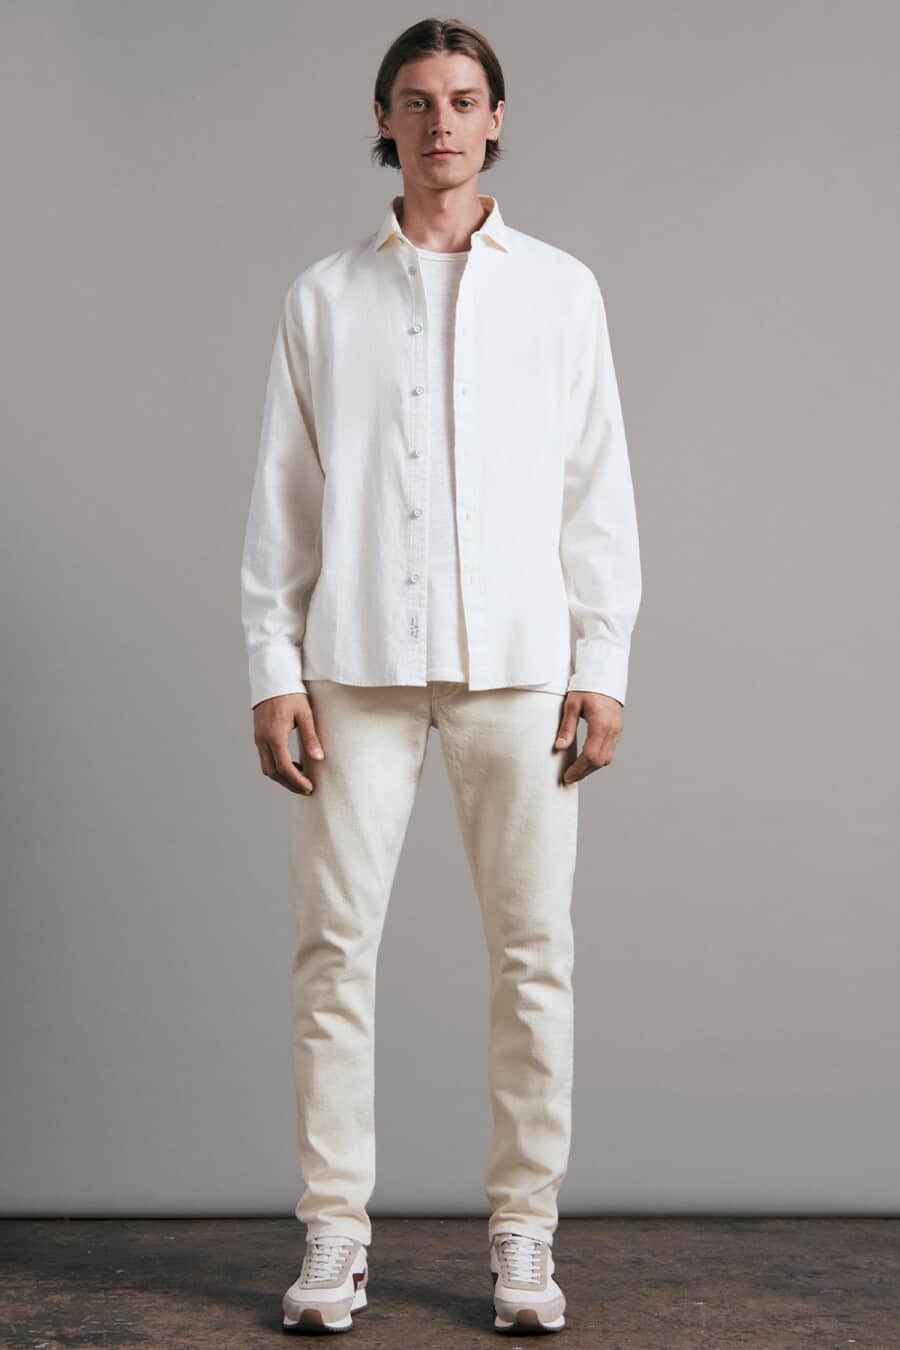 Men's off-white jeans, white T-shirt, white open overshirt and retro running sneakers outfit